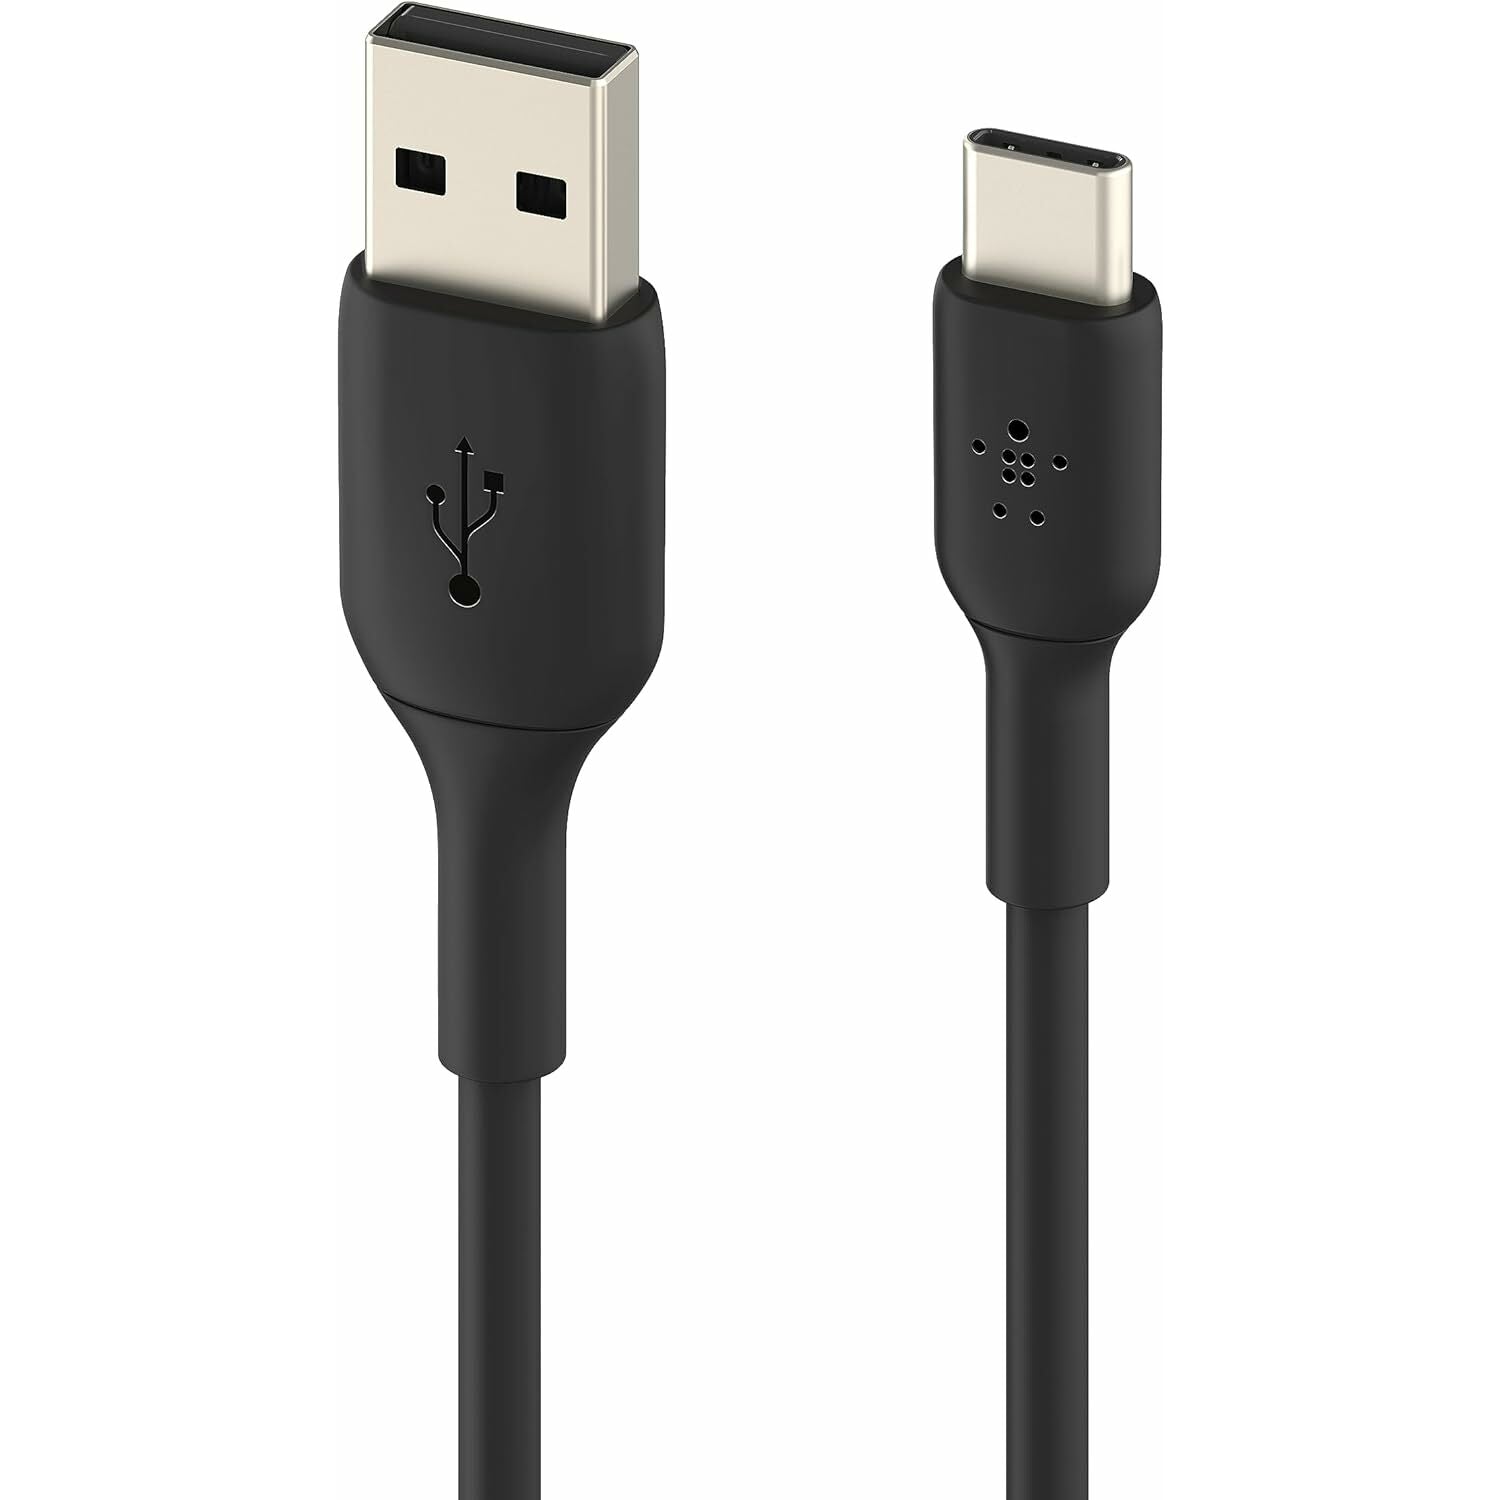 Belkin BoostCharge USB-C to USB-A Cable Durable & Fast Charging (2m / 6.6ft, Black)